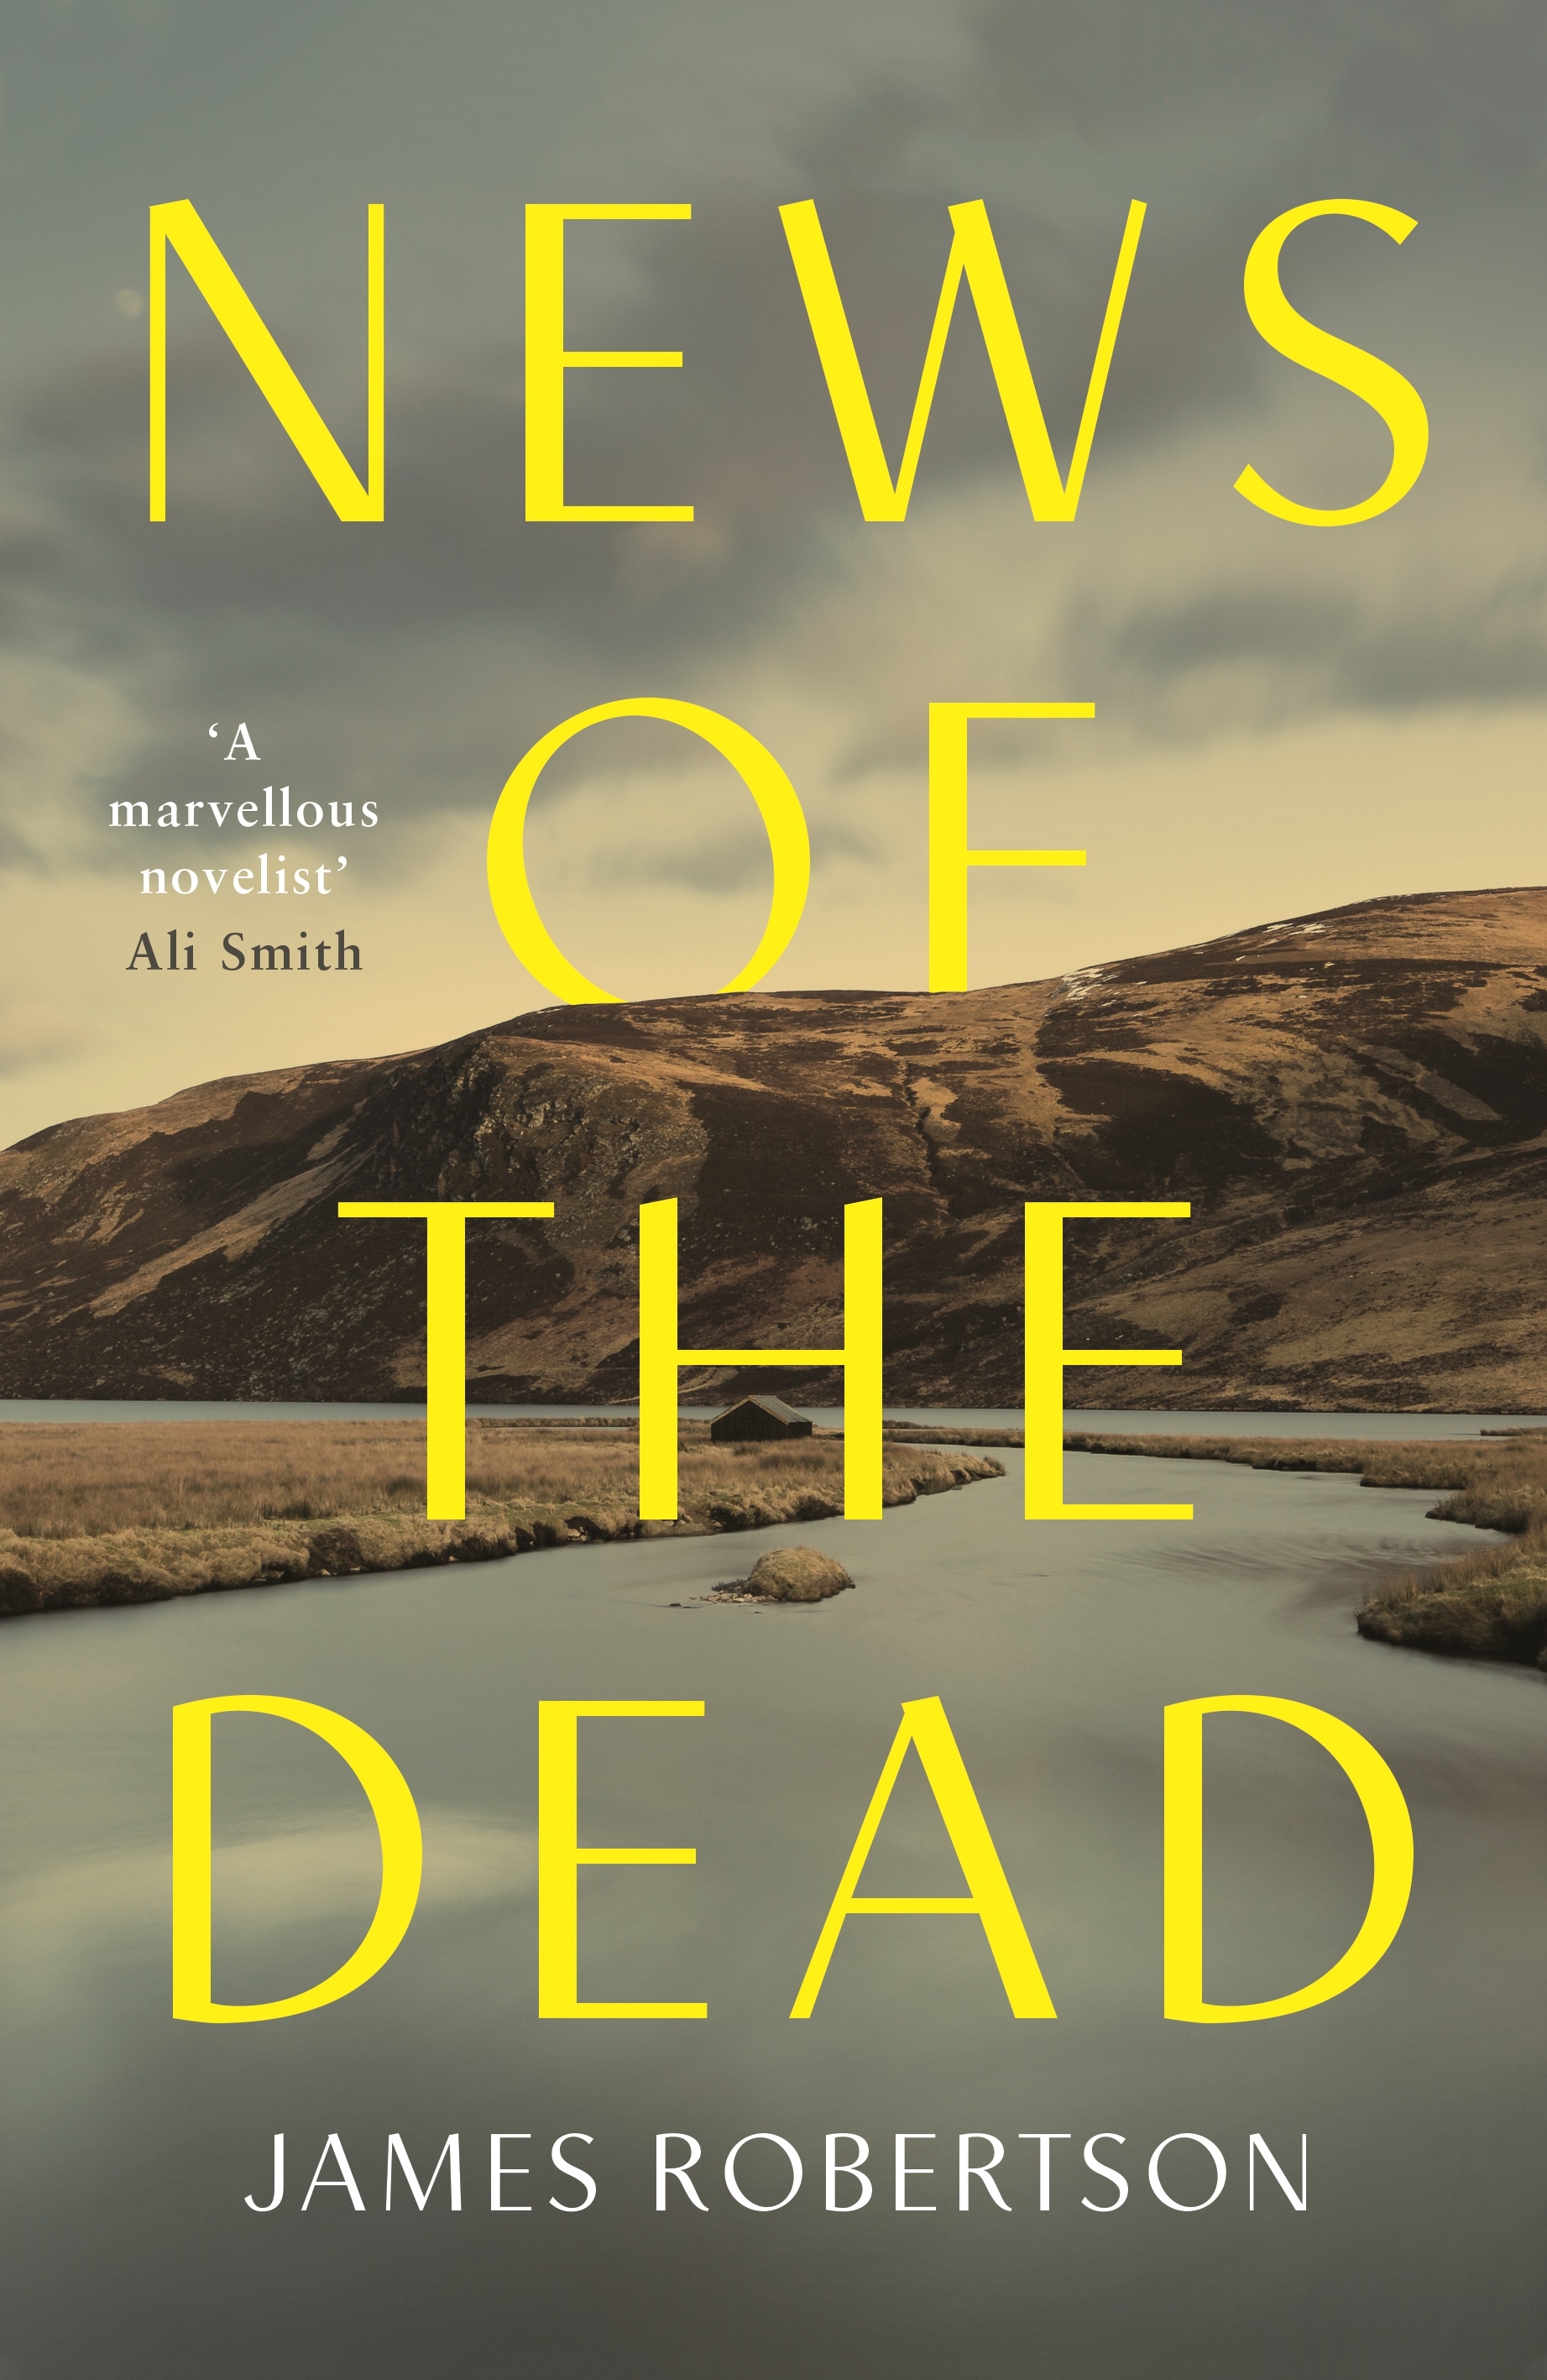 Book “News of the Dead” by James Robertson — August 5, 2021